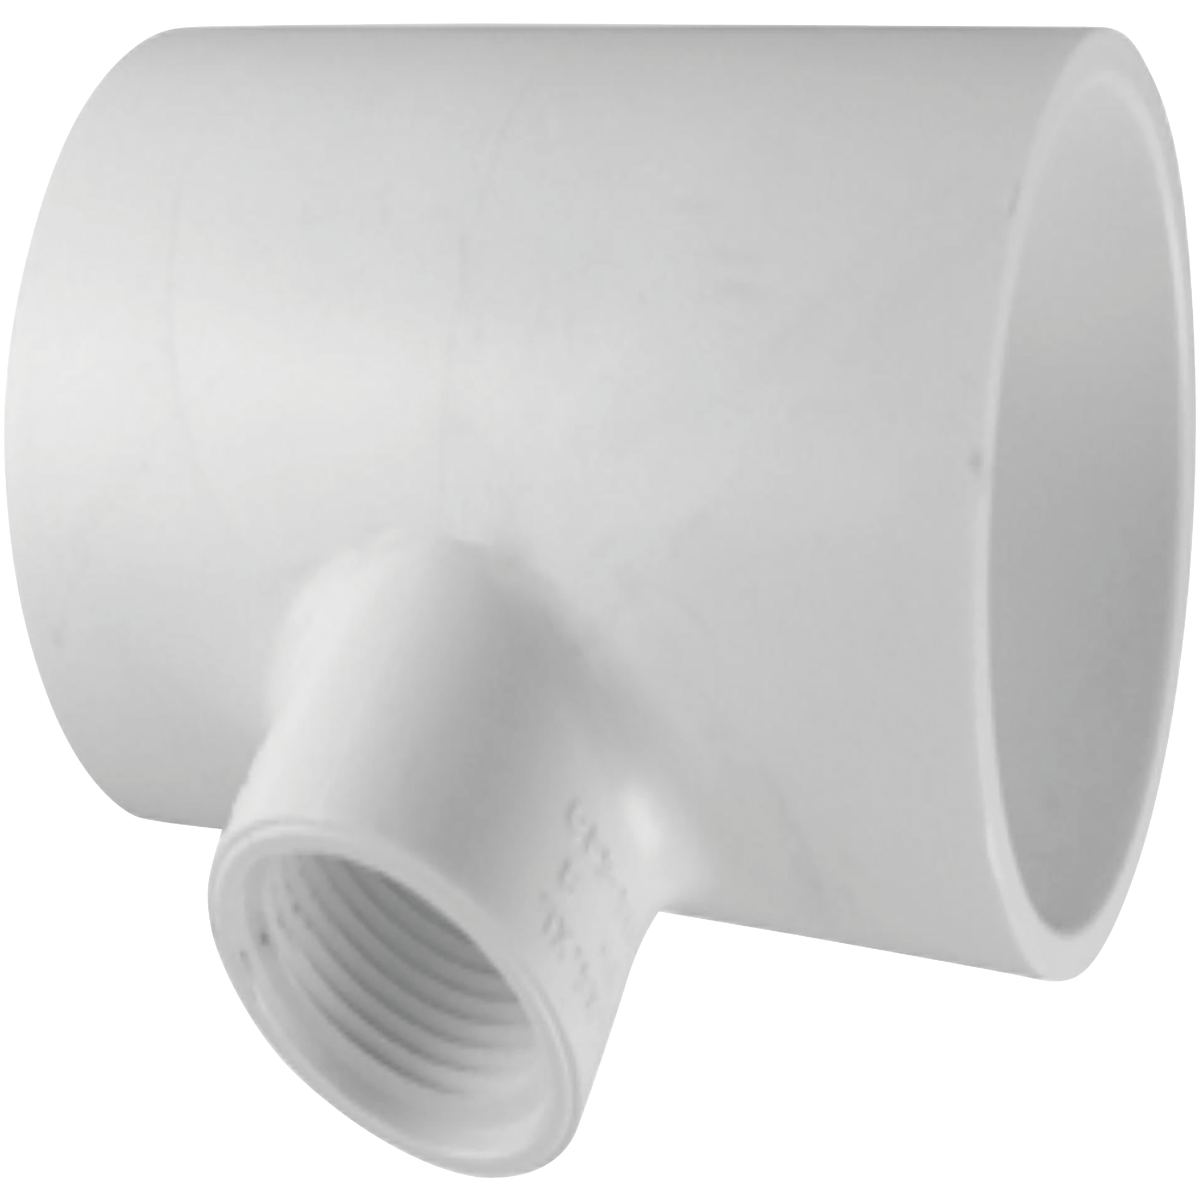 Charlotte Pipe 1-1/2 In Sch 40 PVC Coupling PVC 02100  1400HA Pack of 25 